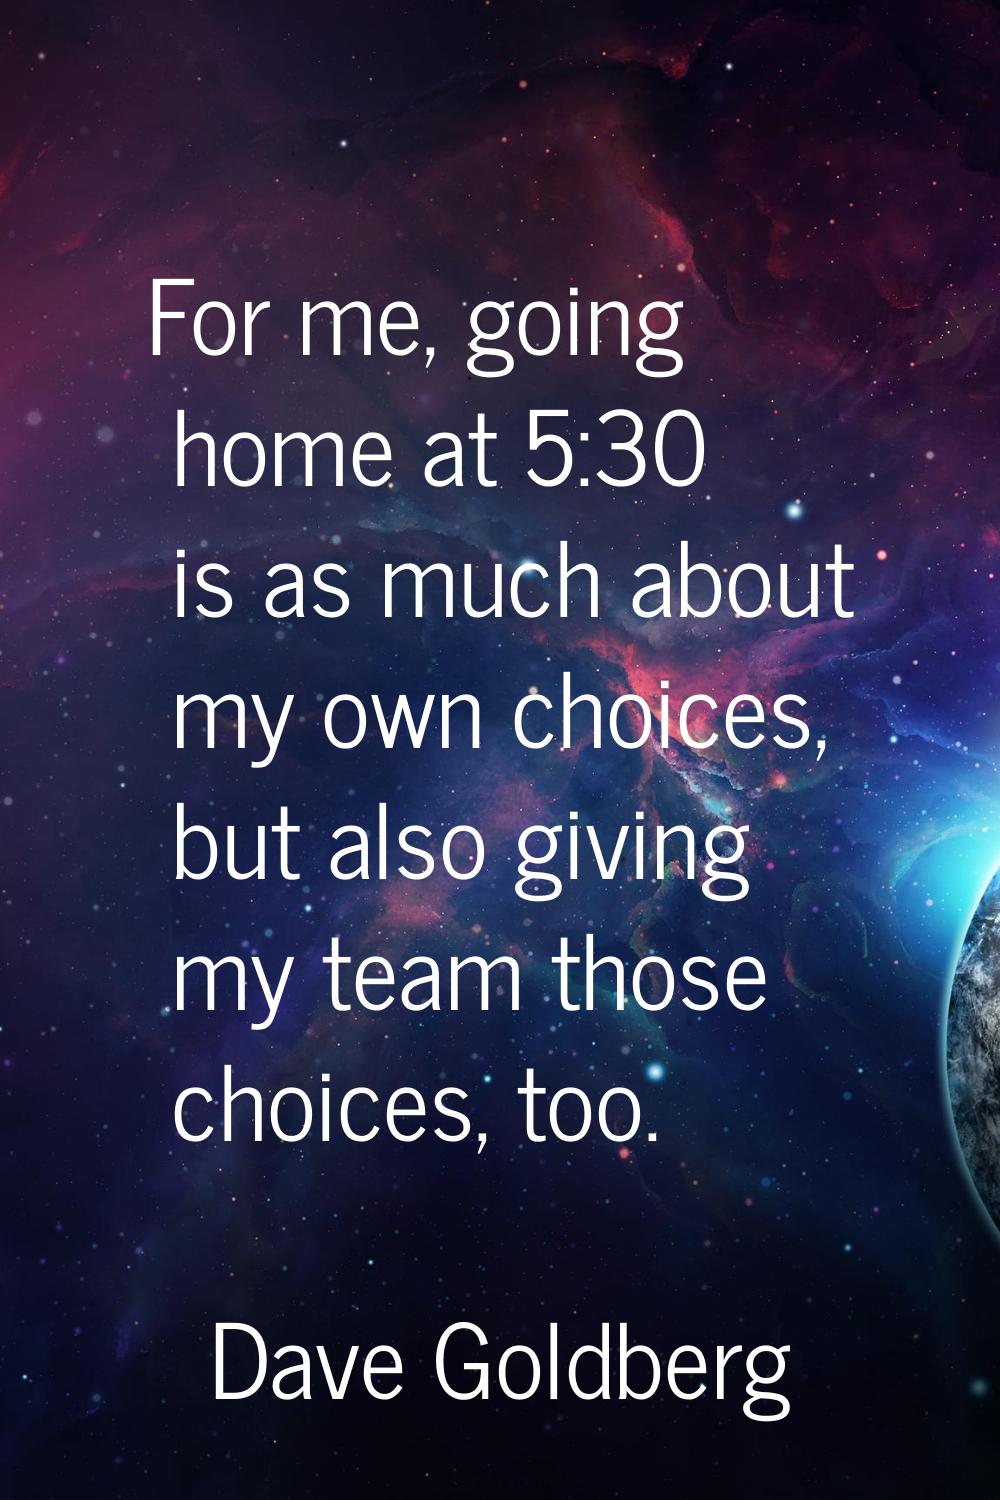 For me, going home at 5:30 is as much about my own choices, but also giving my team those choices, 